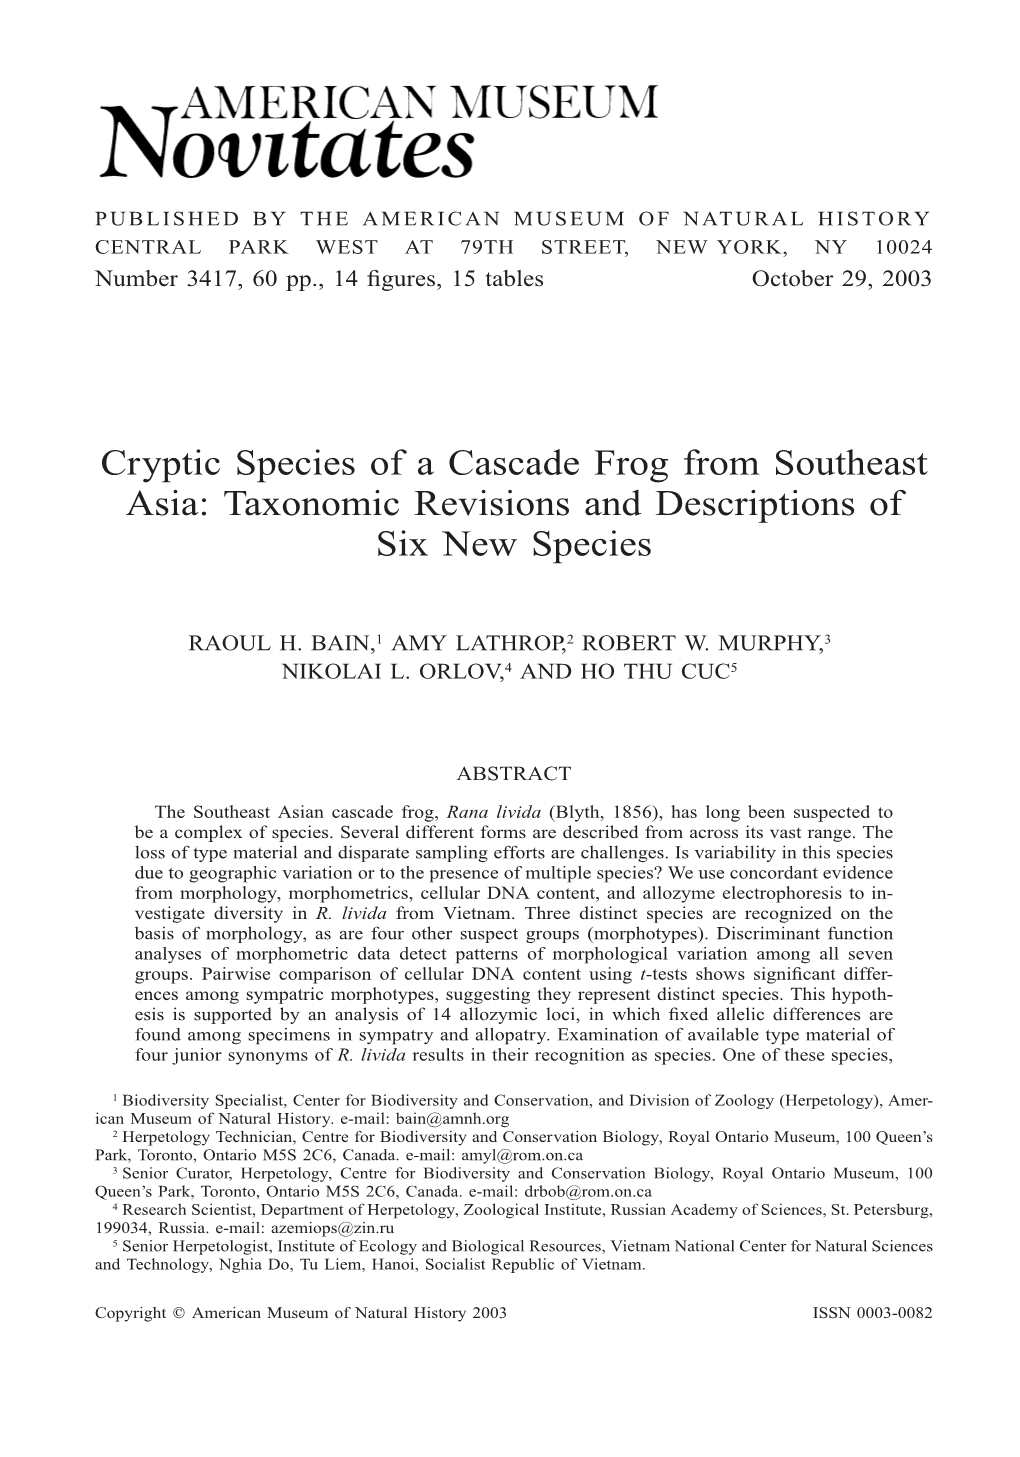 Cryptic Species of a Cascade Frog from Southeast Asia: Taxonomic Revisions and Descriptions of Six New Species